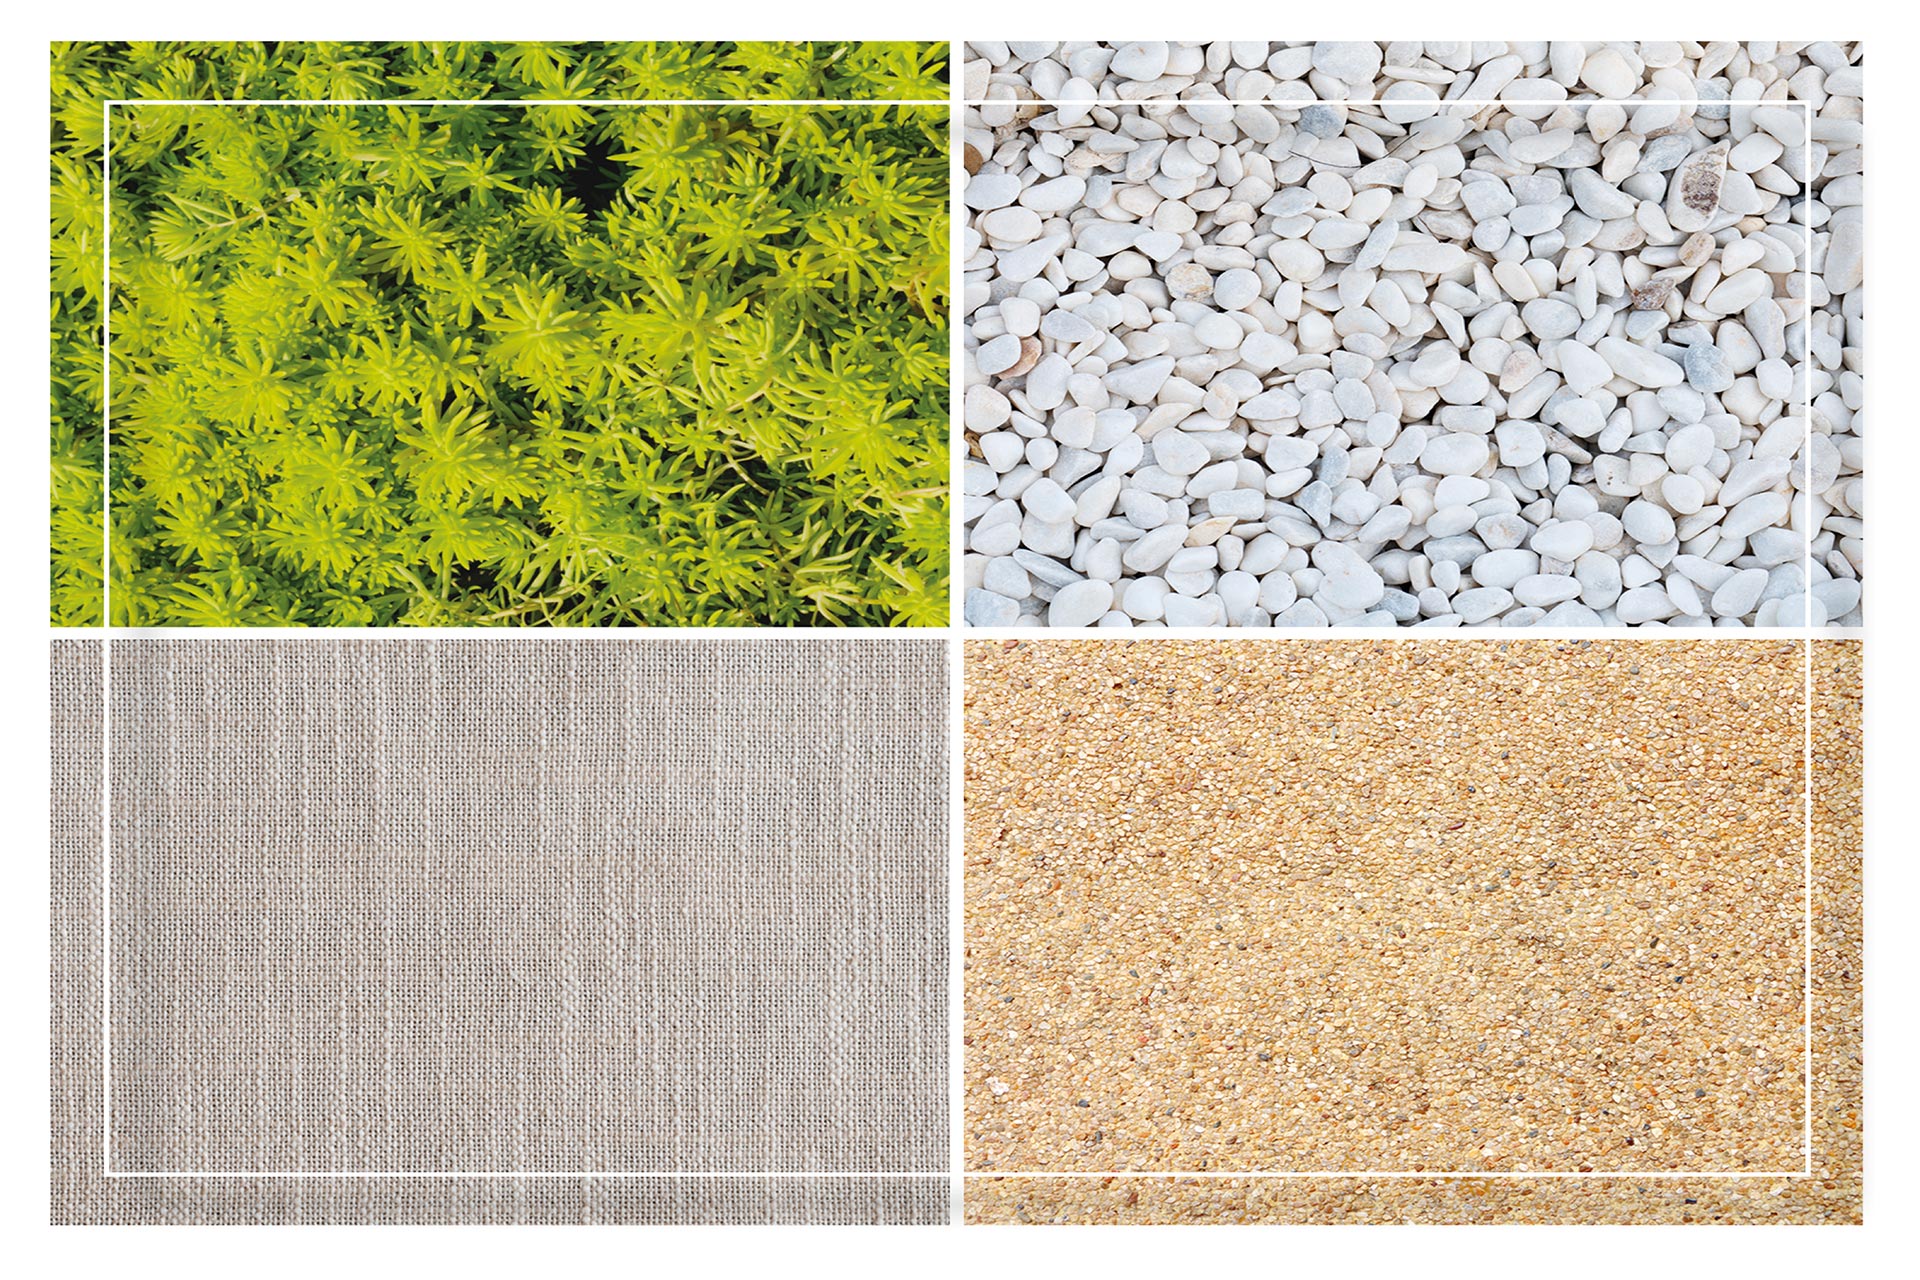 Examples of natural EPP textures.